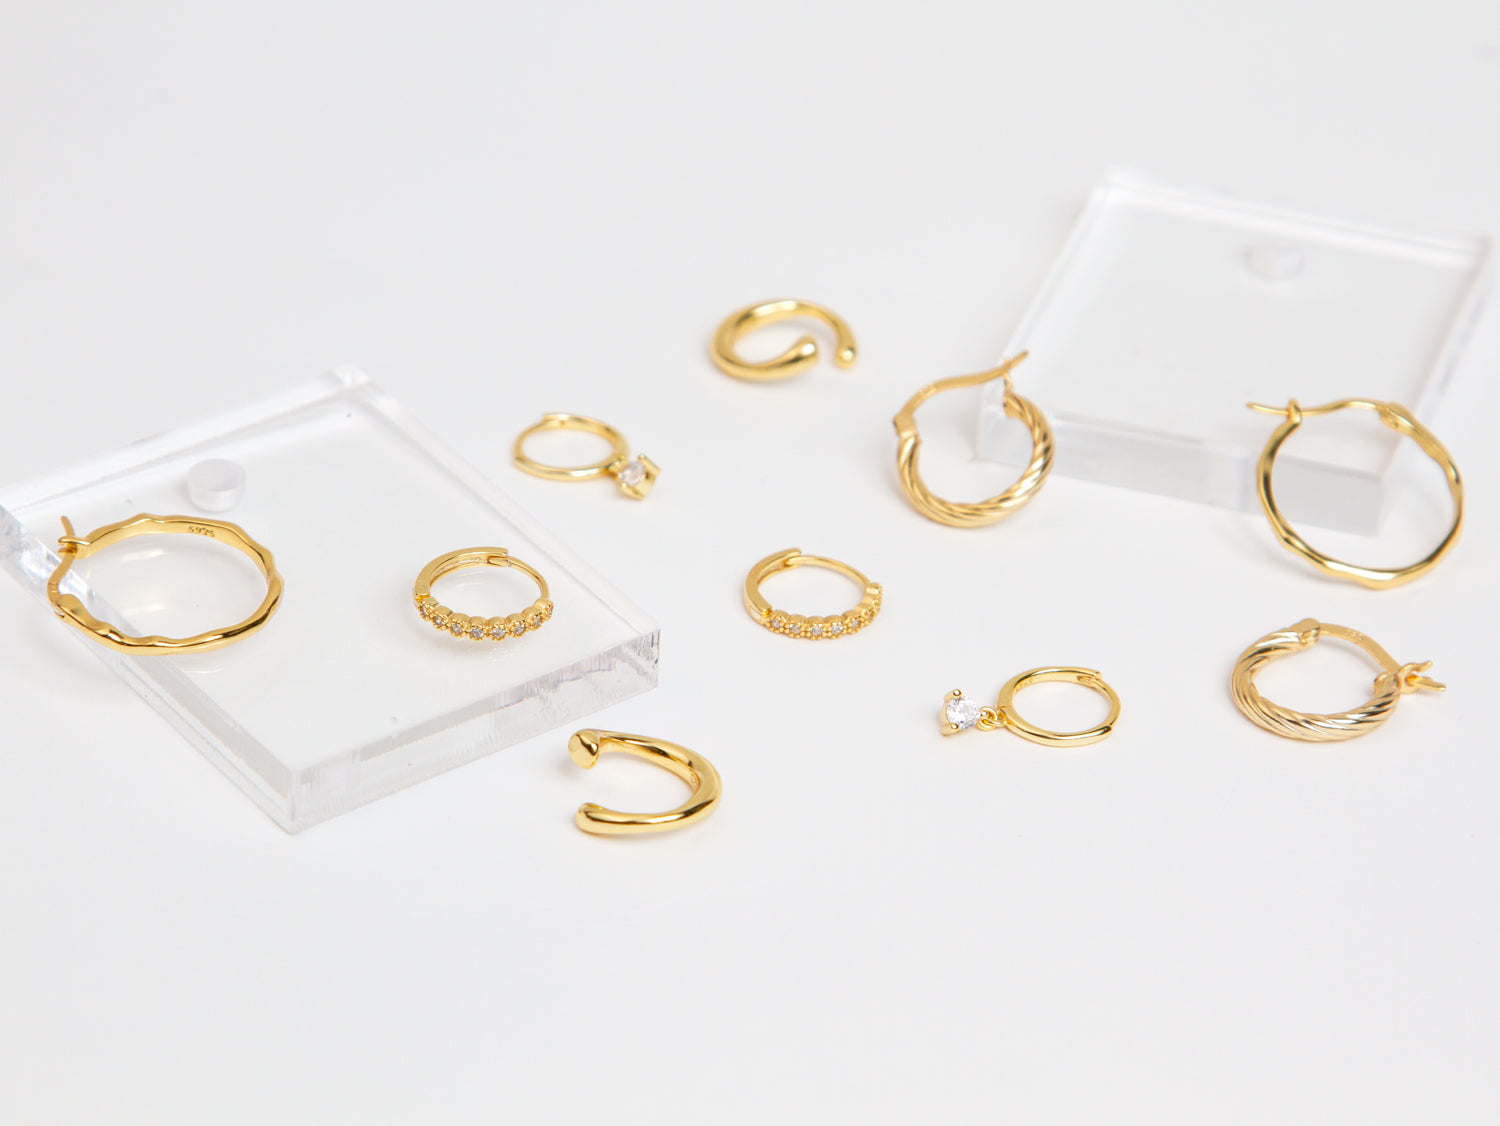 Complete Earring Guide: Styles, FAQ, & More